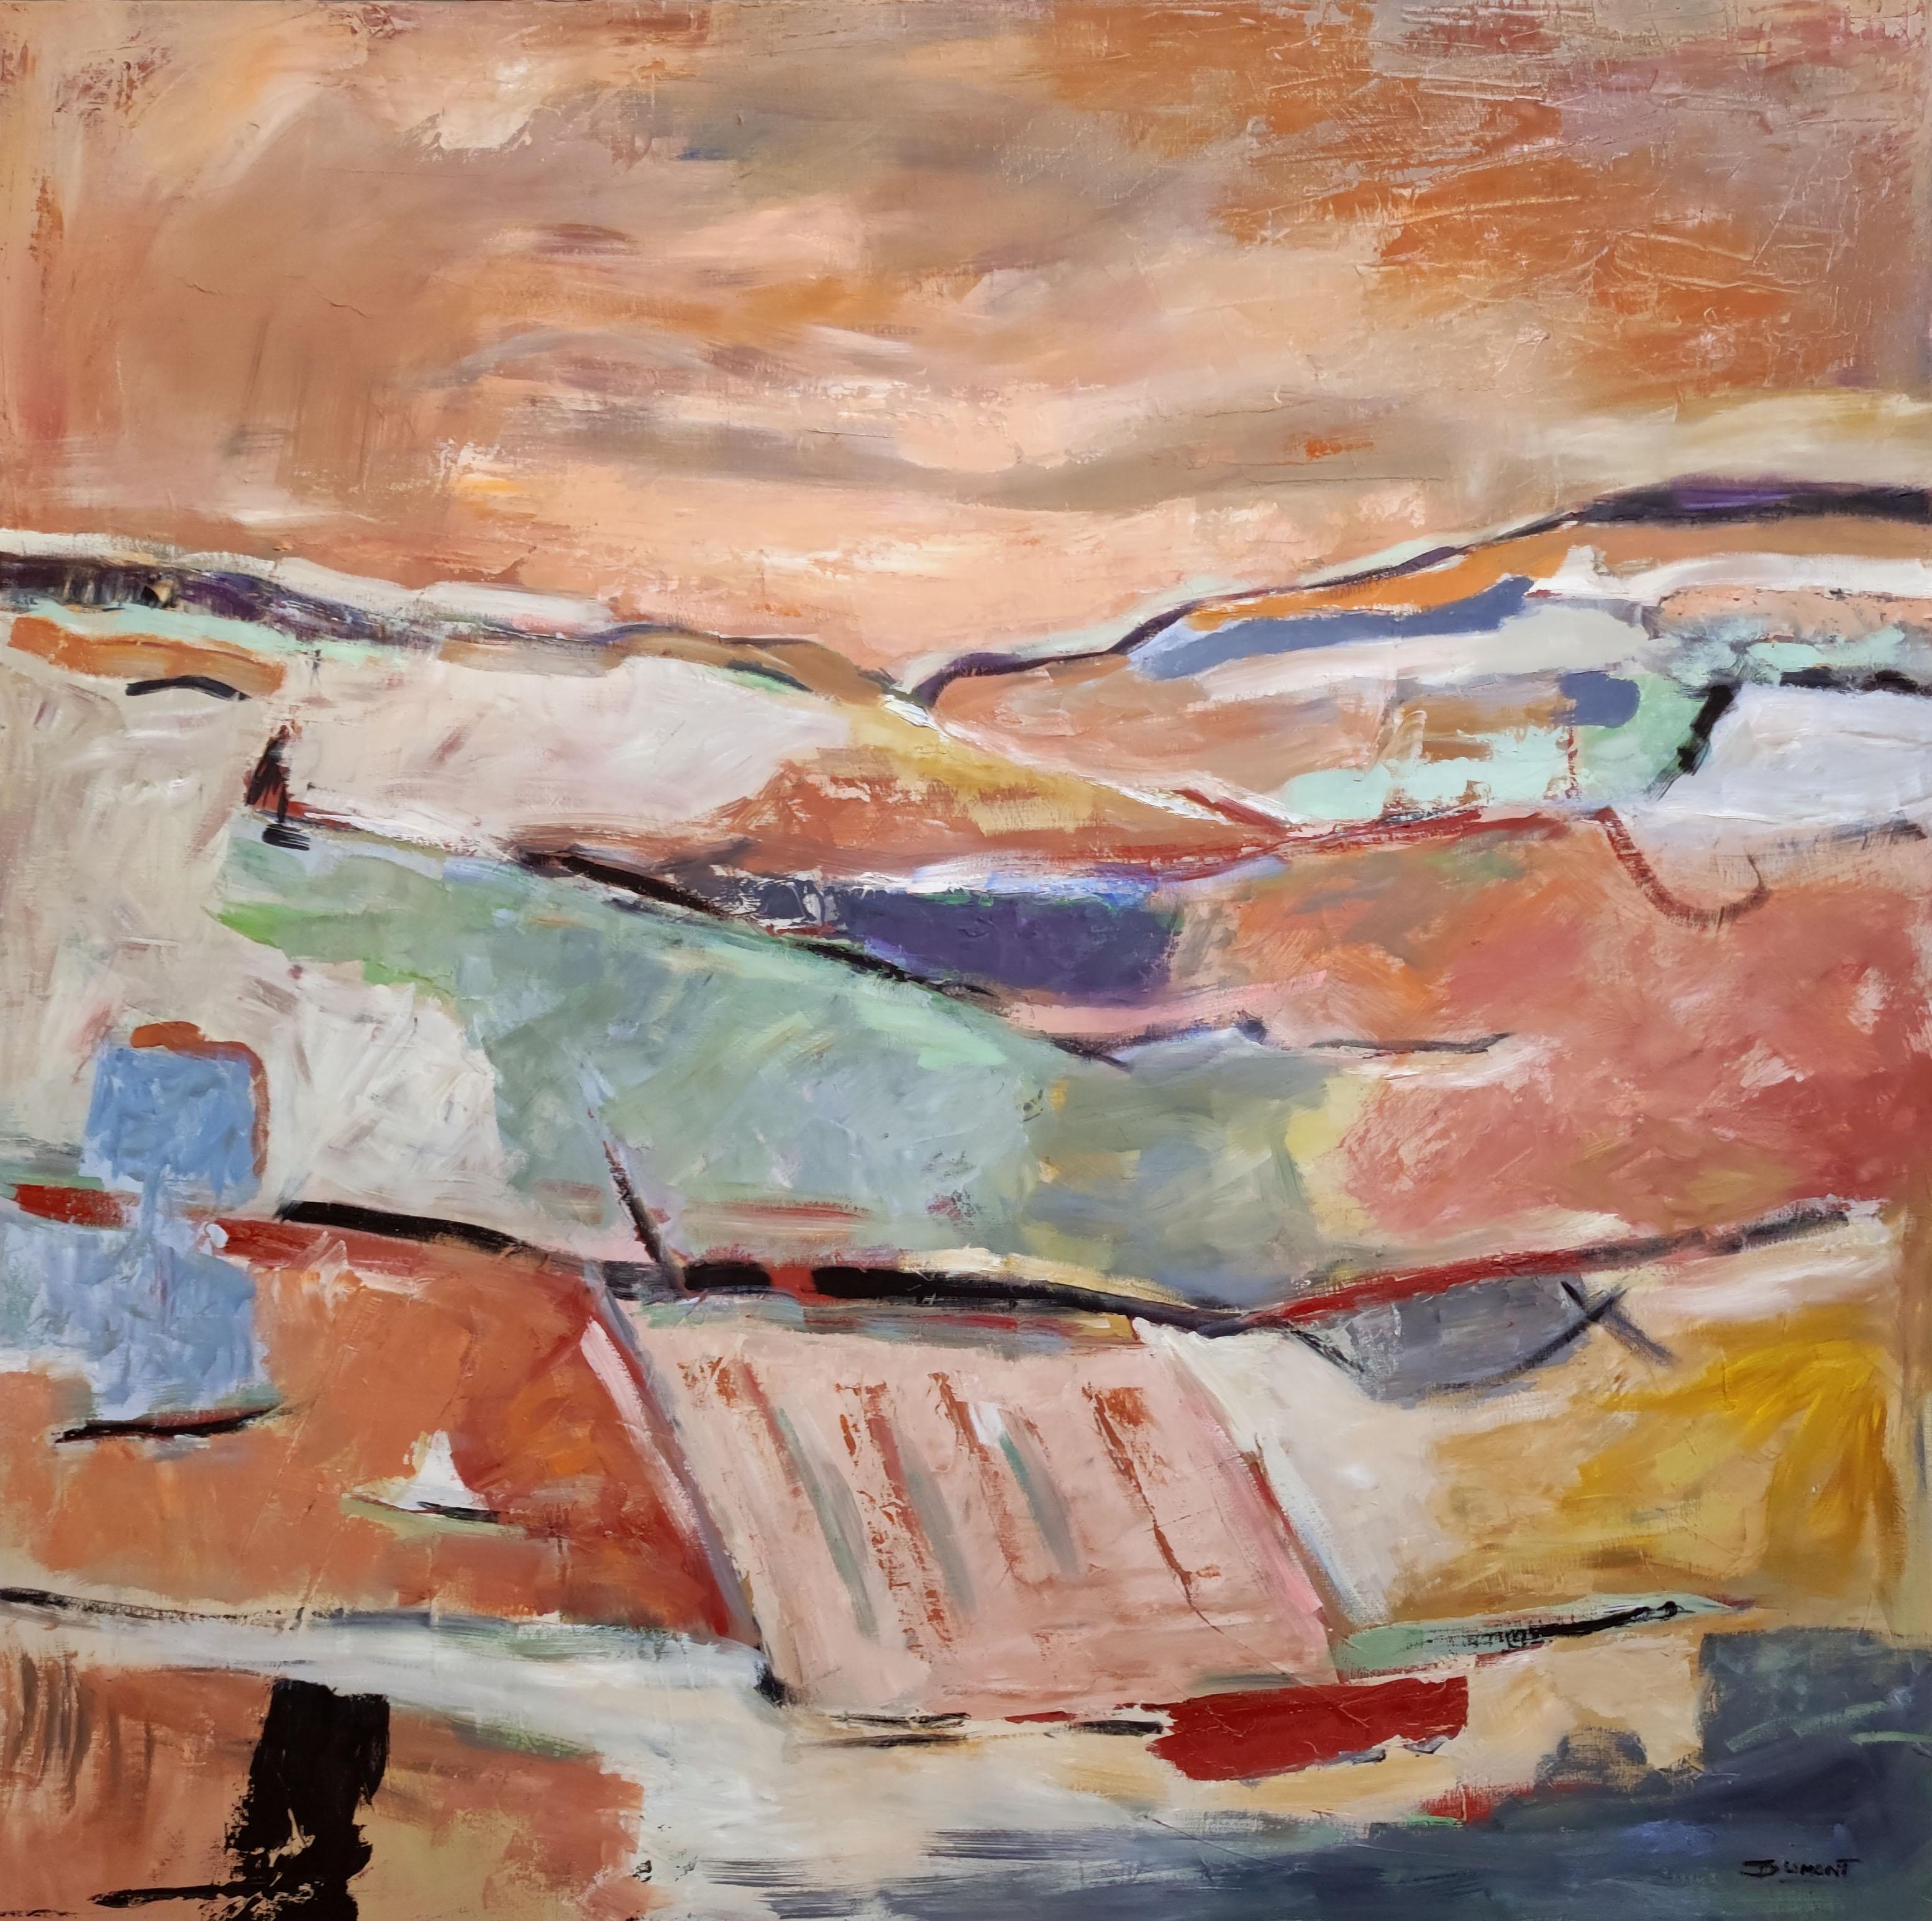  panorama, abstract landscape; expressionism, contempory art - Painting by SOPHIE DUMONT